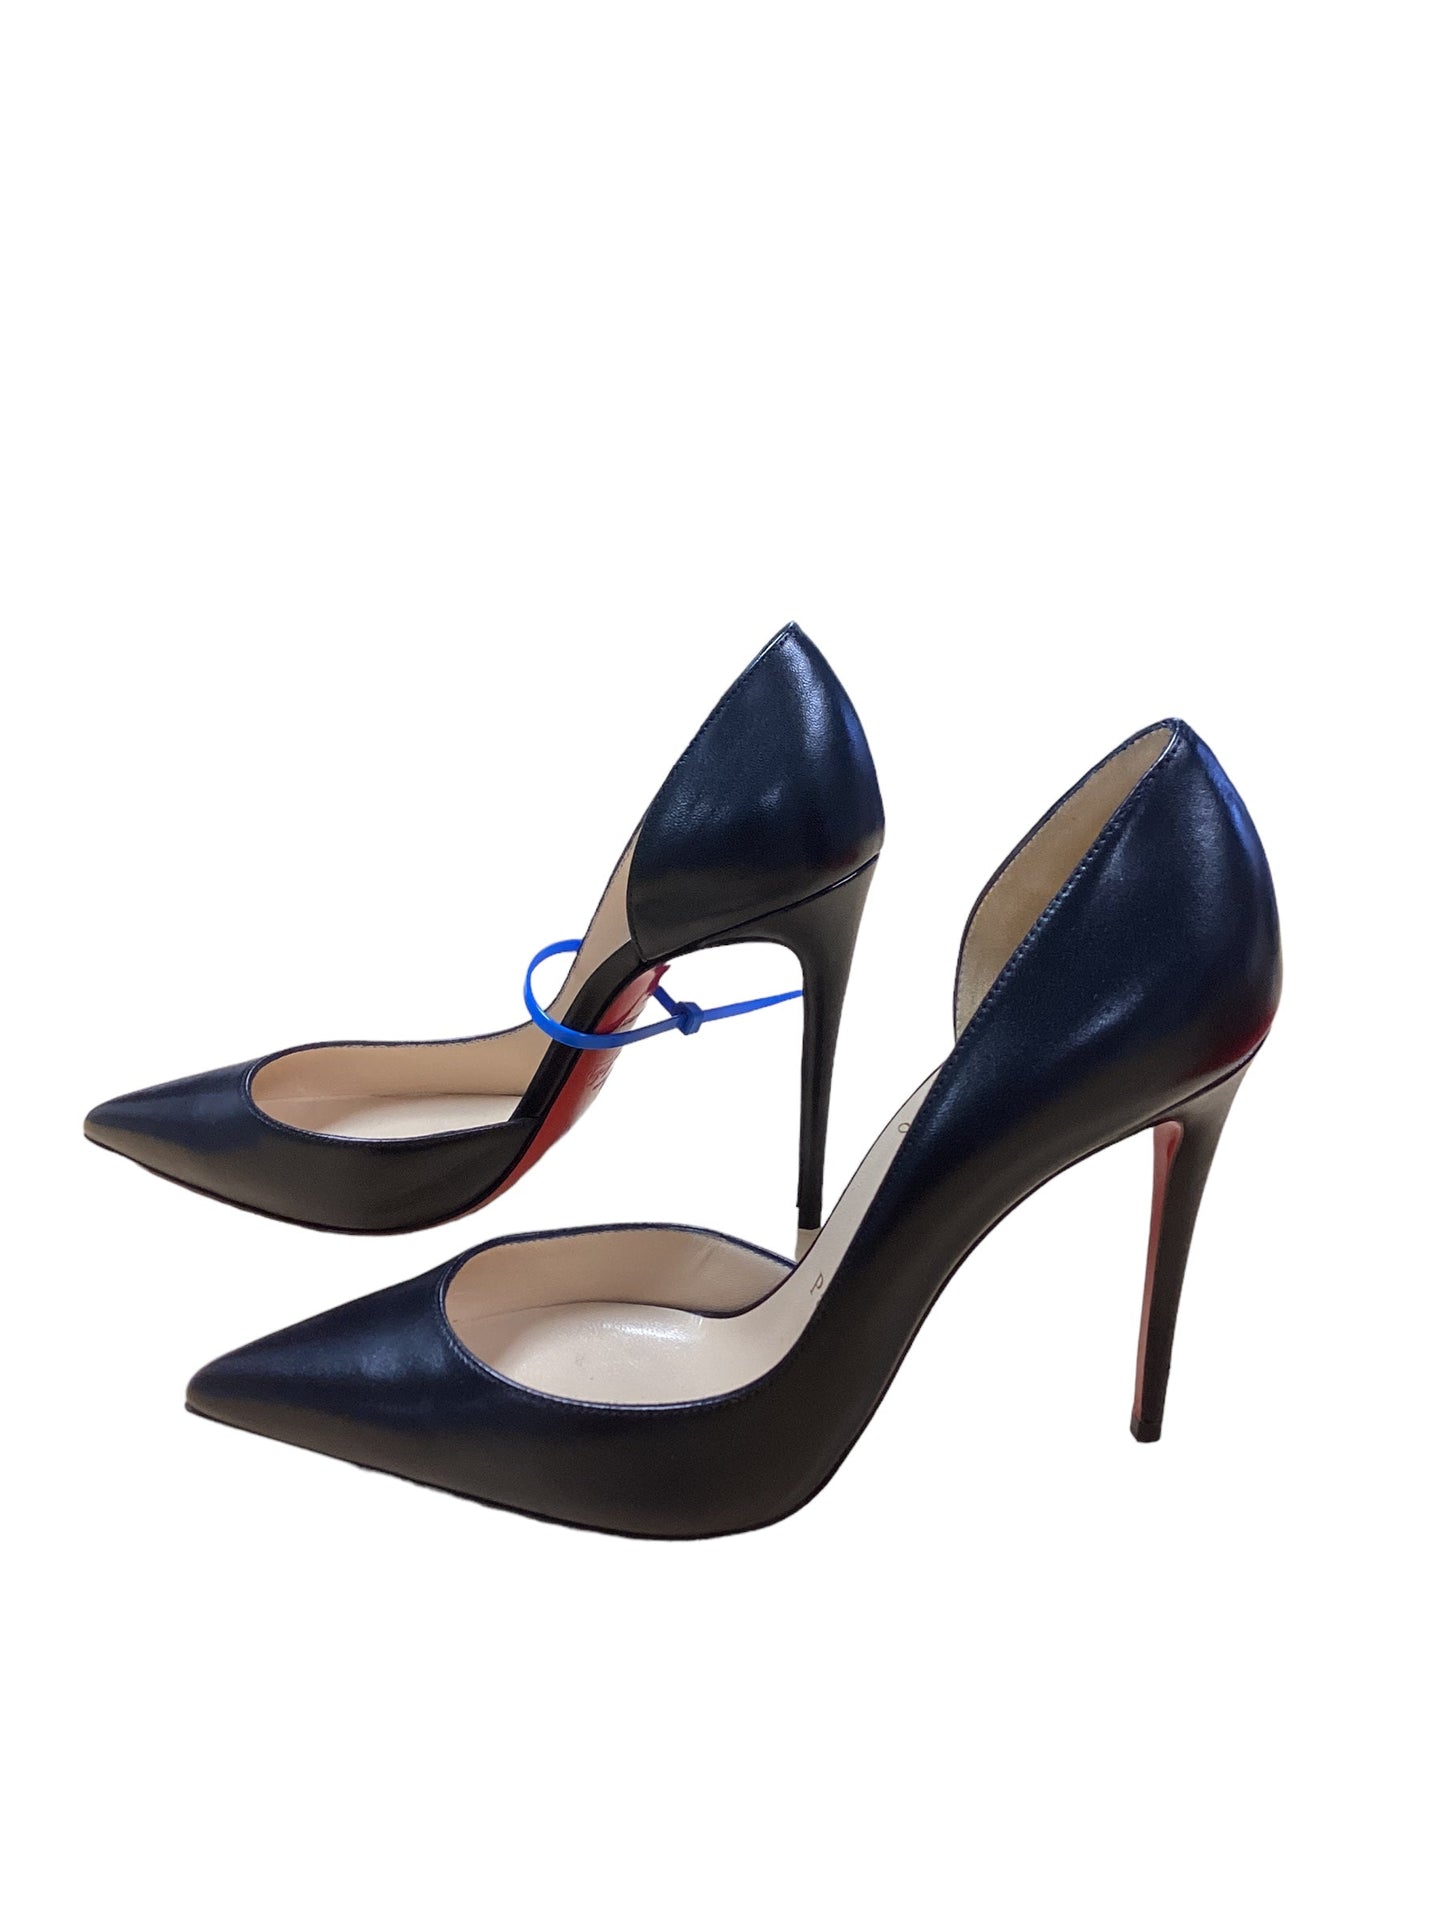 Shoes Luxury Designer By Christian Louboutin  Size: 7.5